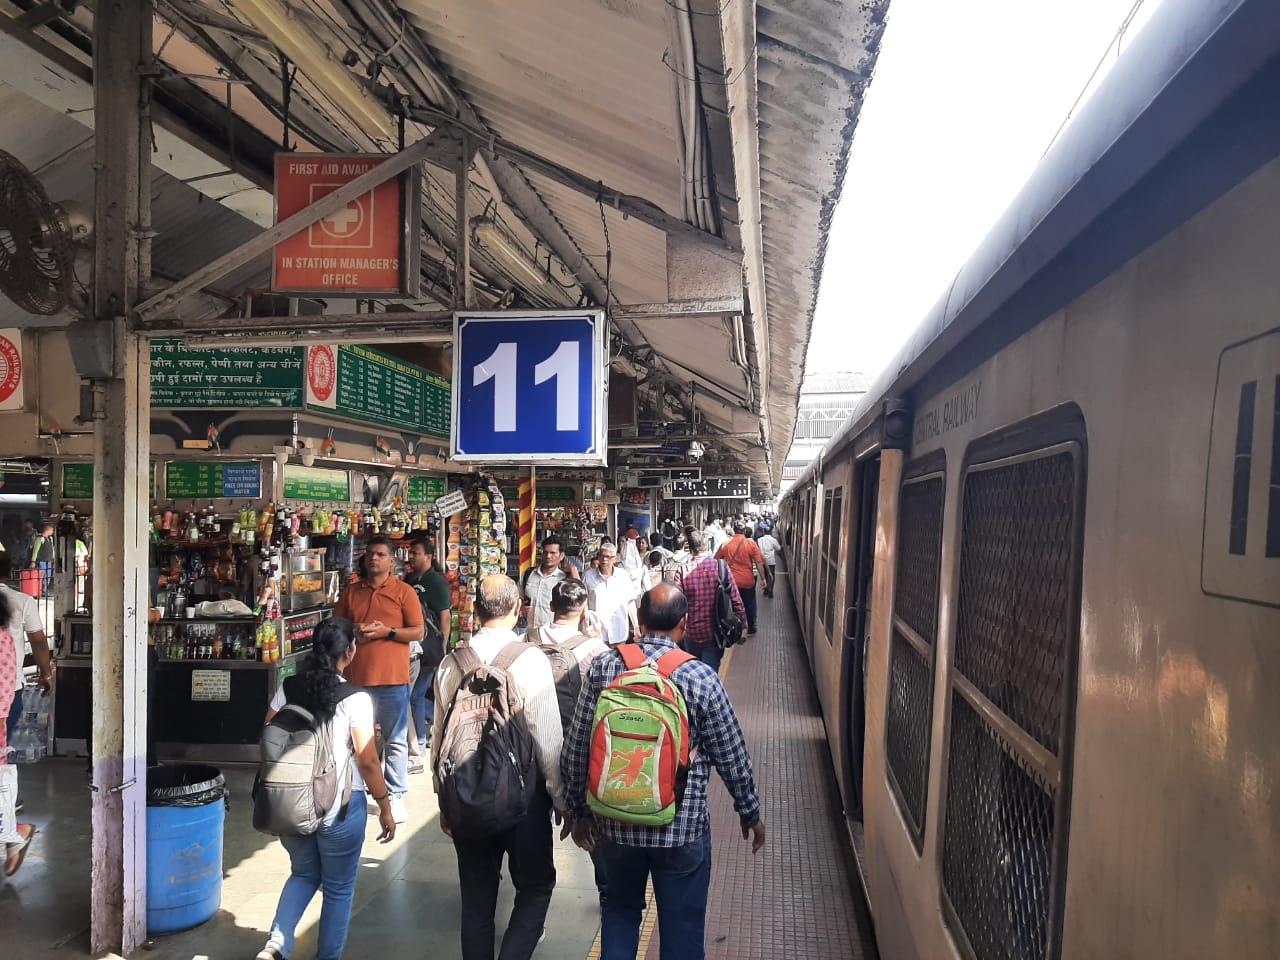 The revised platform numbers for Dadar station will be as follows: the existing platform number 1 of Central Railway will become platform no. 8, while platform number 2 has been removed for platform widening